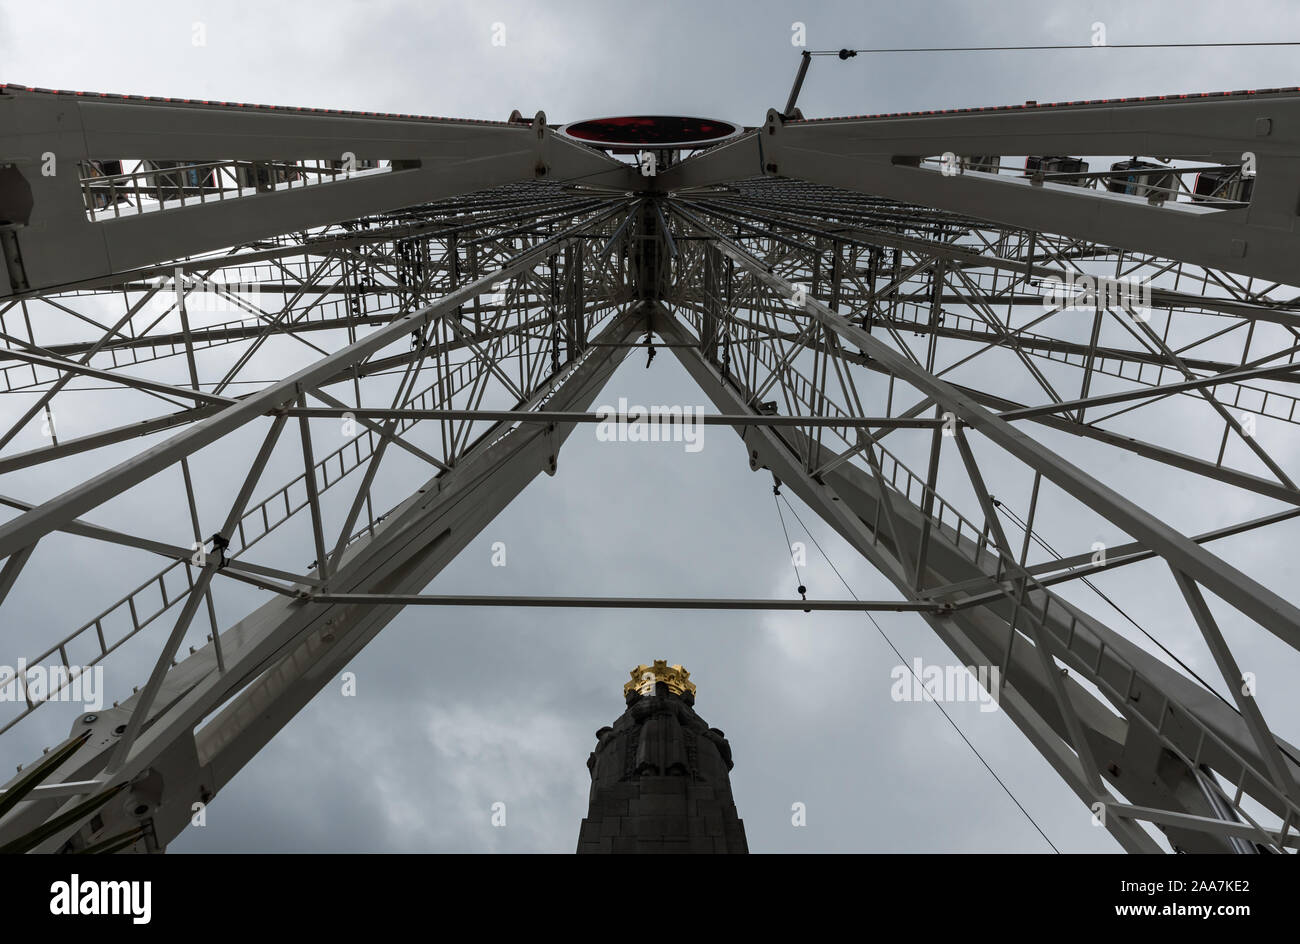 Brussels Capital Region / Belgium - 10 16 2019: Geometric view from low angle of a ferris wheel at the Poelaert square Stock Photo